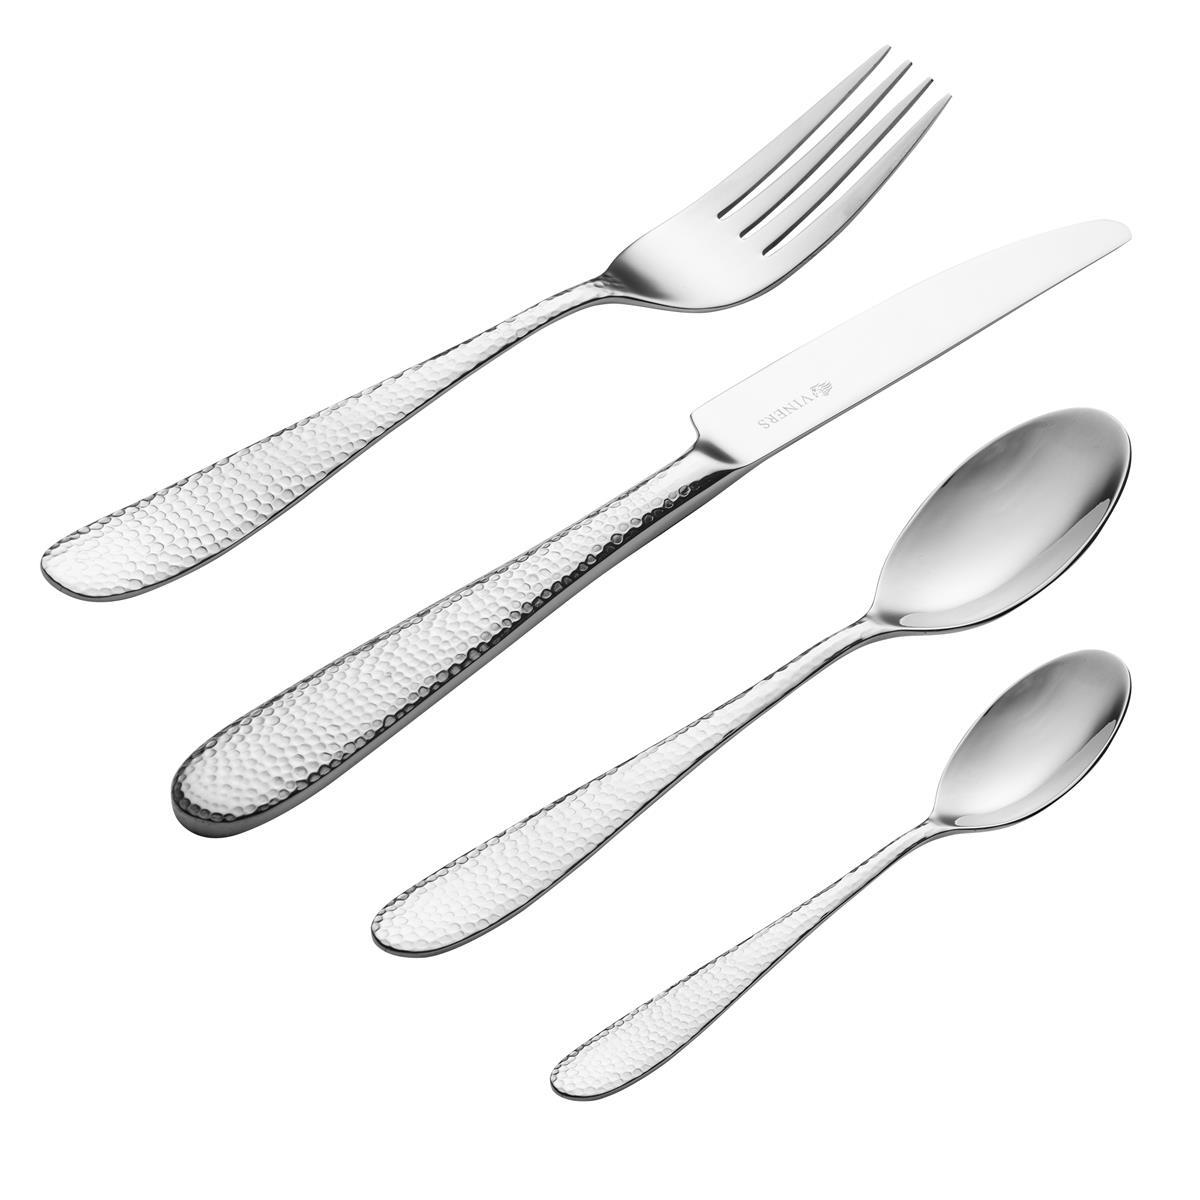 What sizes are offered in the Viners Glamour Cutlery Set?